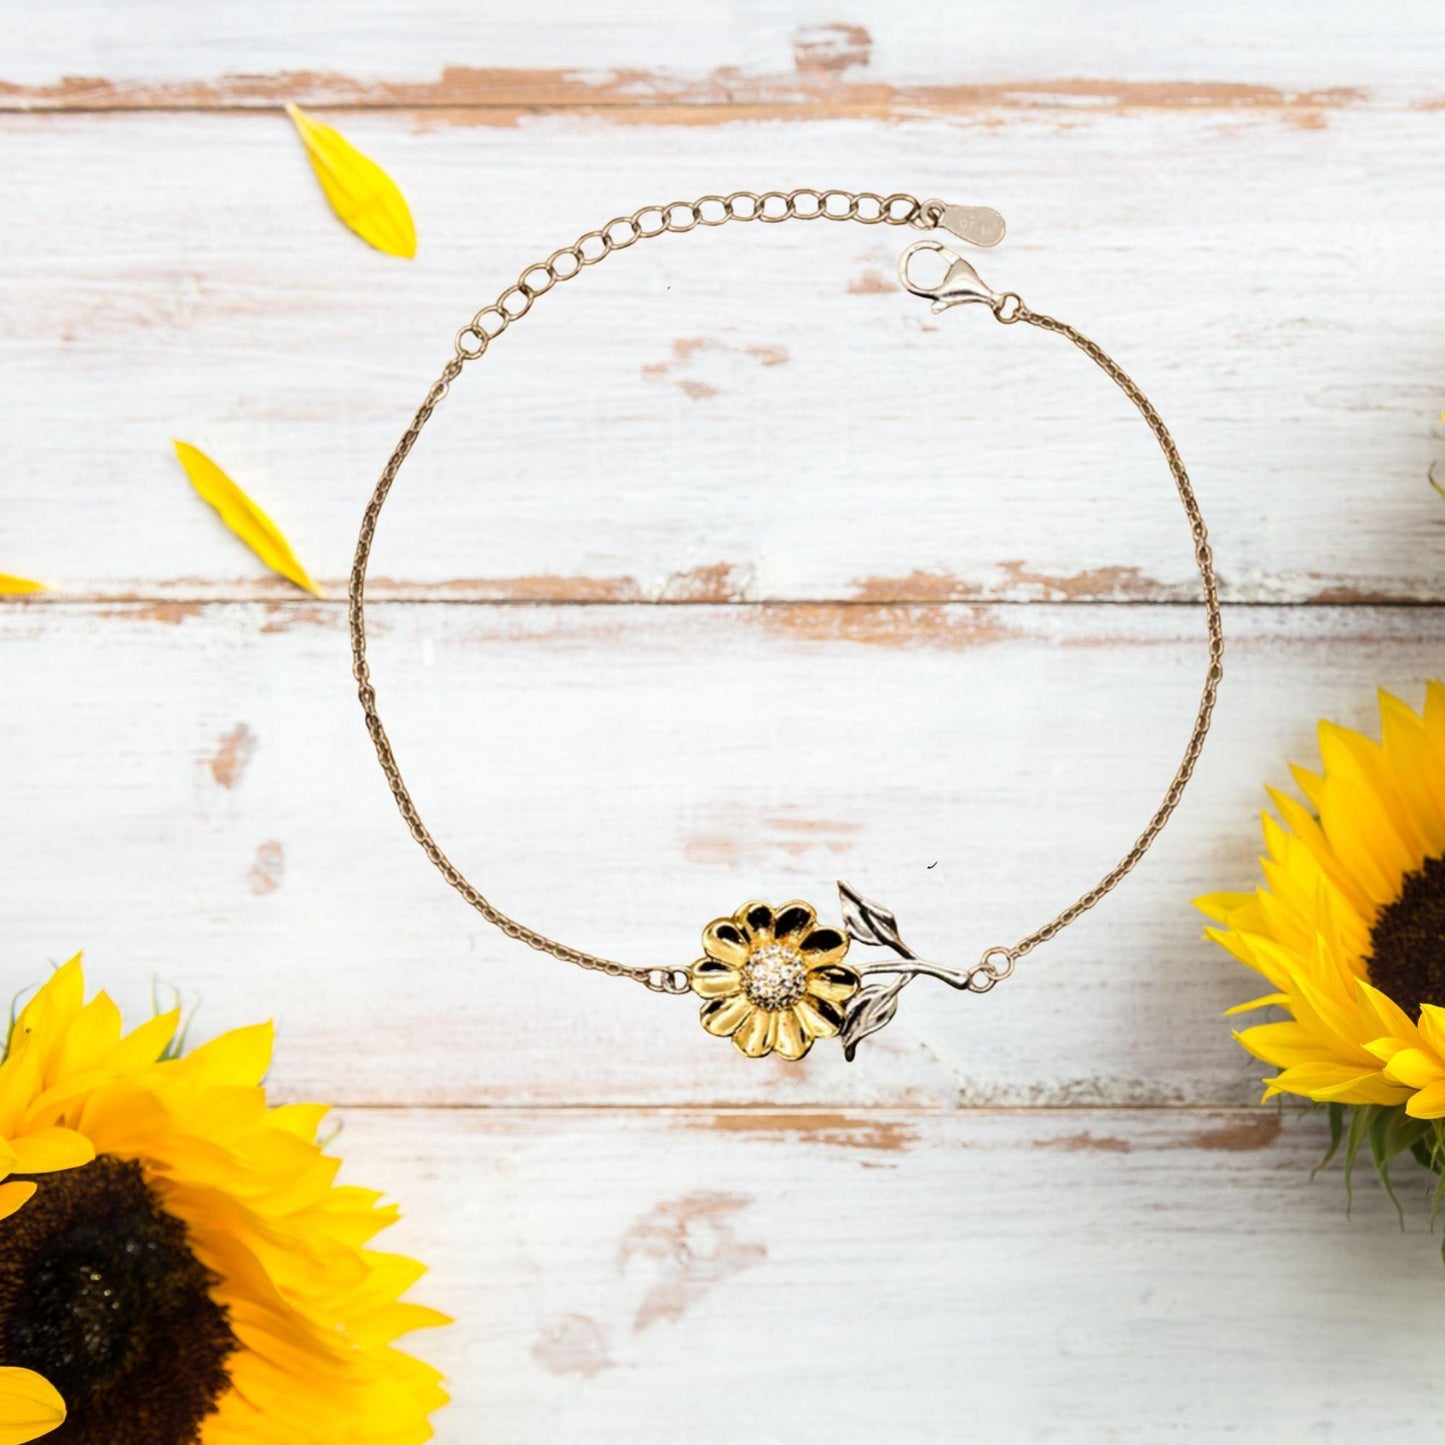 I Left My Heart In New Hampshire Gifts, Meaningful New Hampshire State for Friends, Men, Women. Sunflower Bracelet for New Hampshire People - Mallard Moon Gift Shop